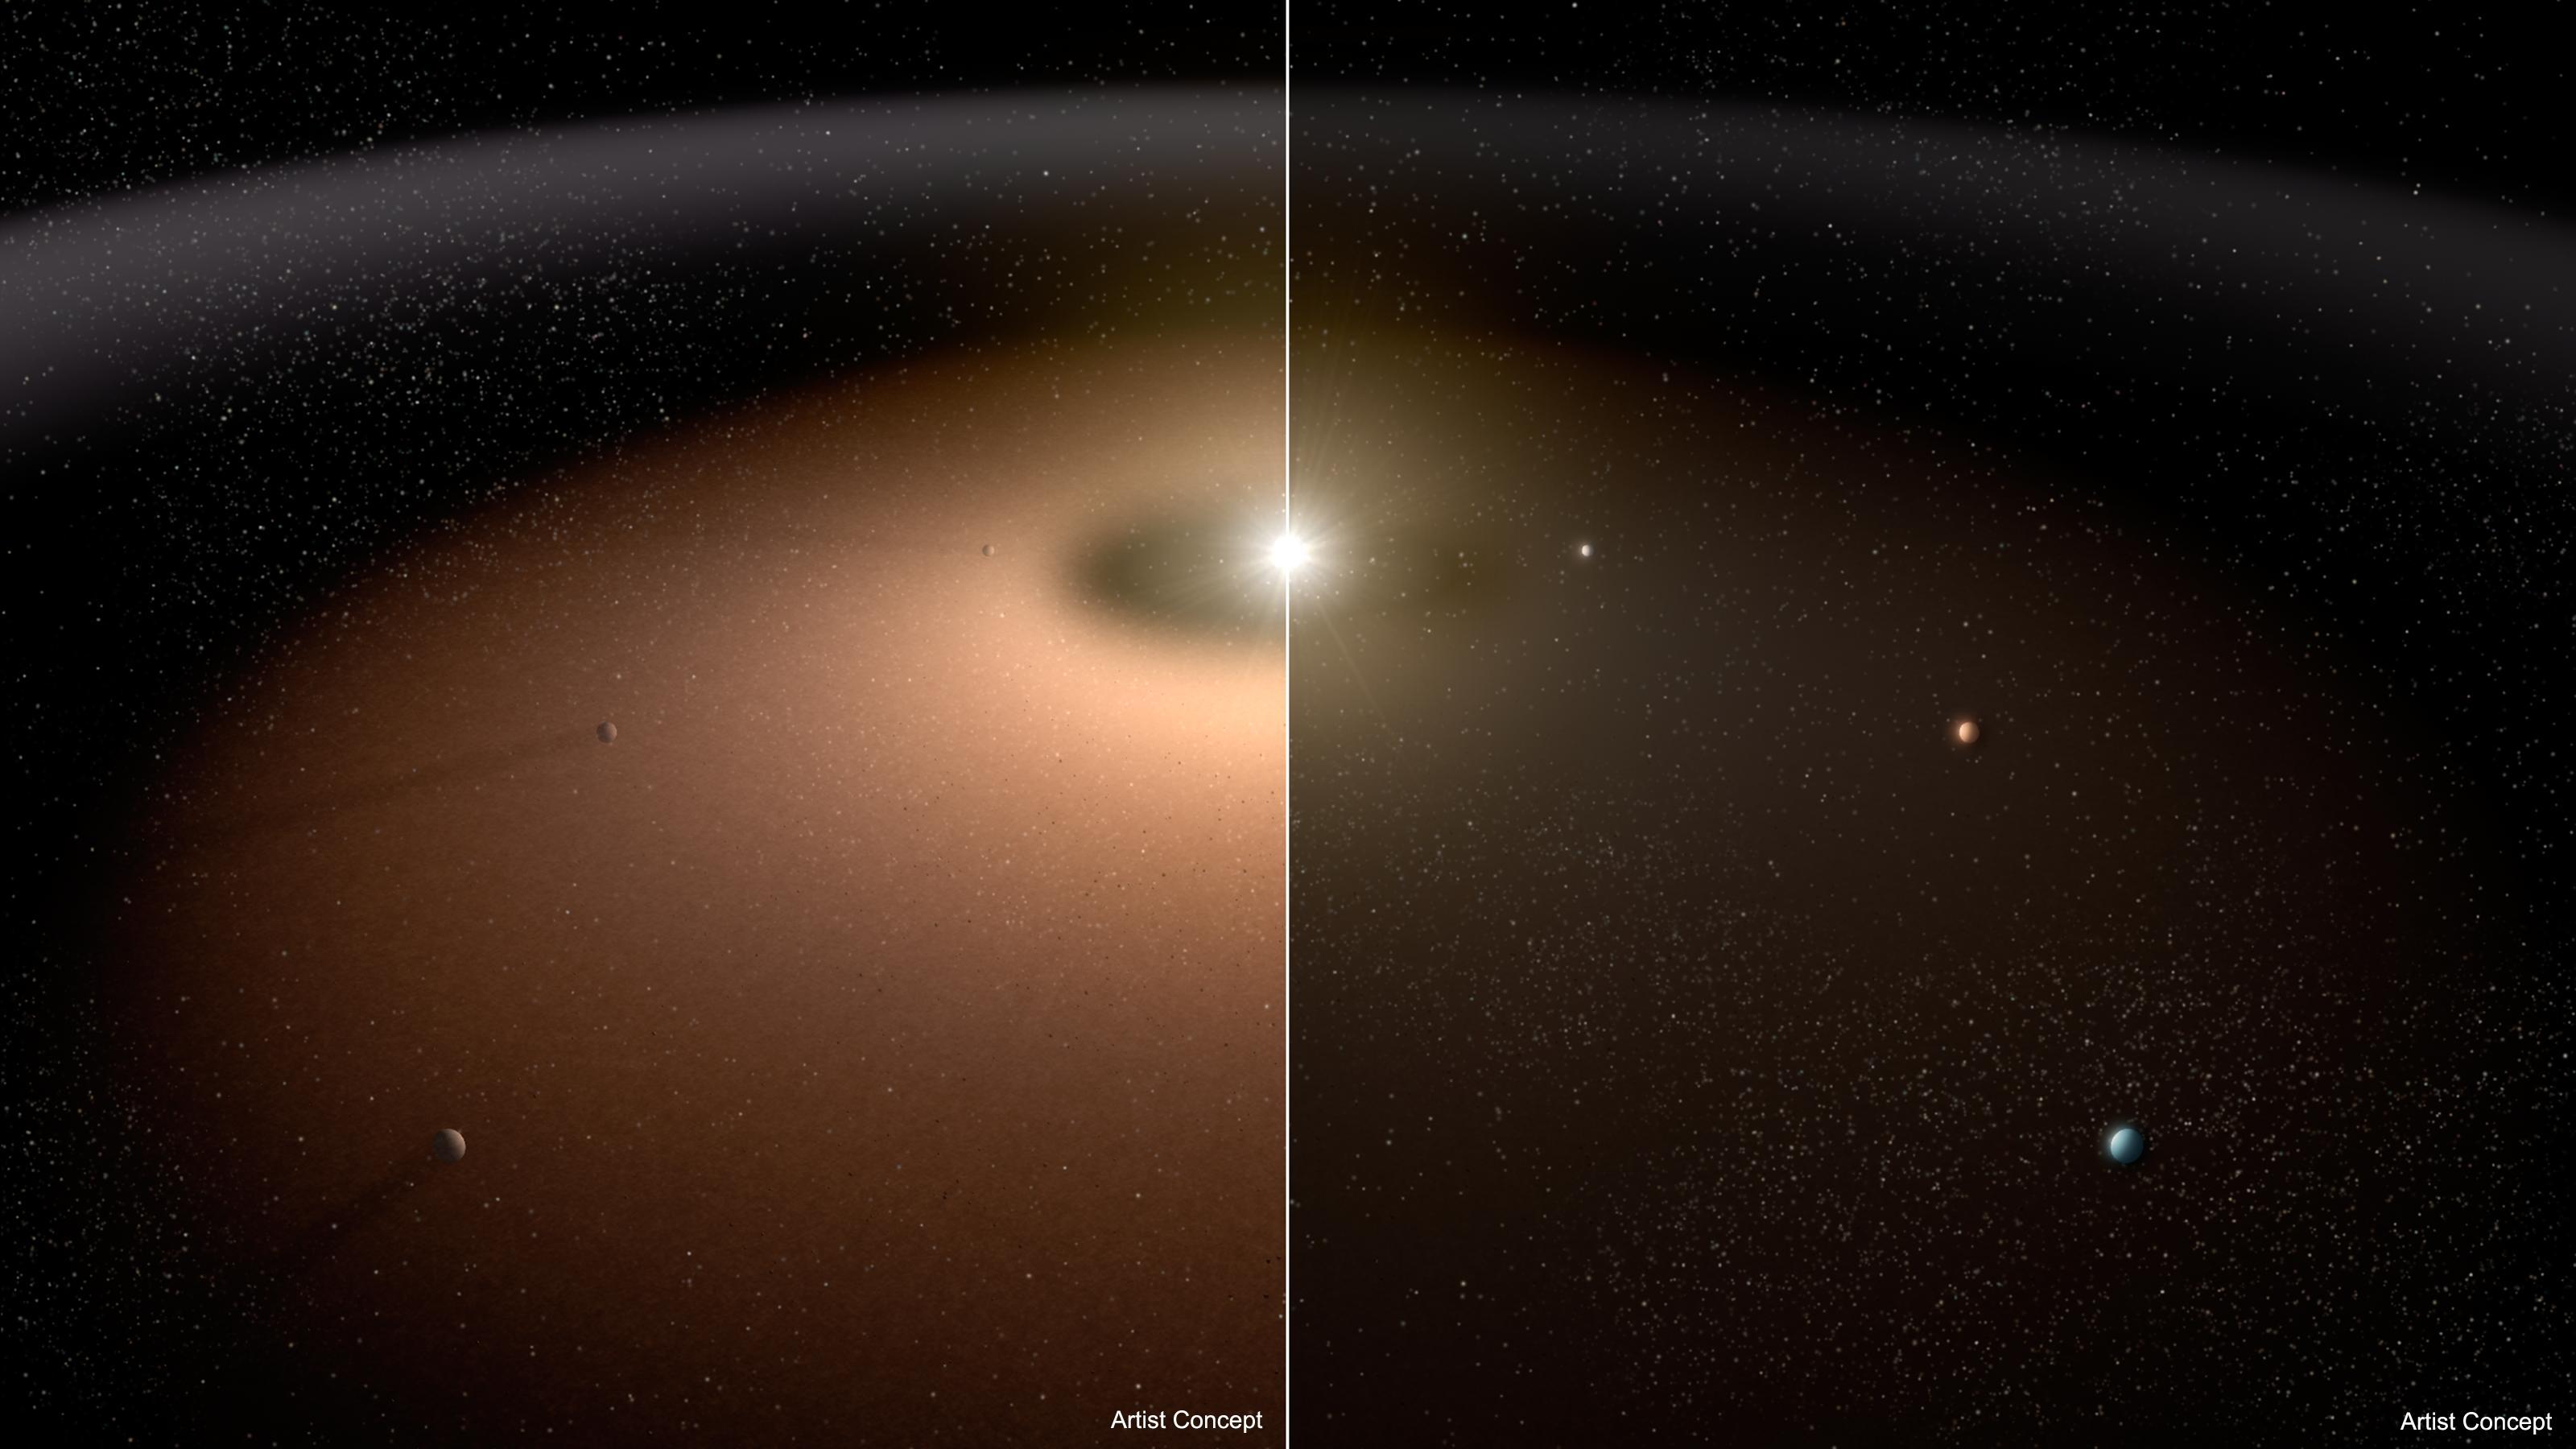 A dusty planetary system (left) is compared to another system with little dust in this artist's concept. Dust can make it difficult for telescopes to image planets because light from the dust can outshine that of the planets. Dust reflects visible light and shines with its own infrared, or thermal, glow. As the illustration shows, planets appear more readily in the planetary system shown at right with less dust.